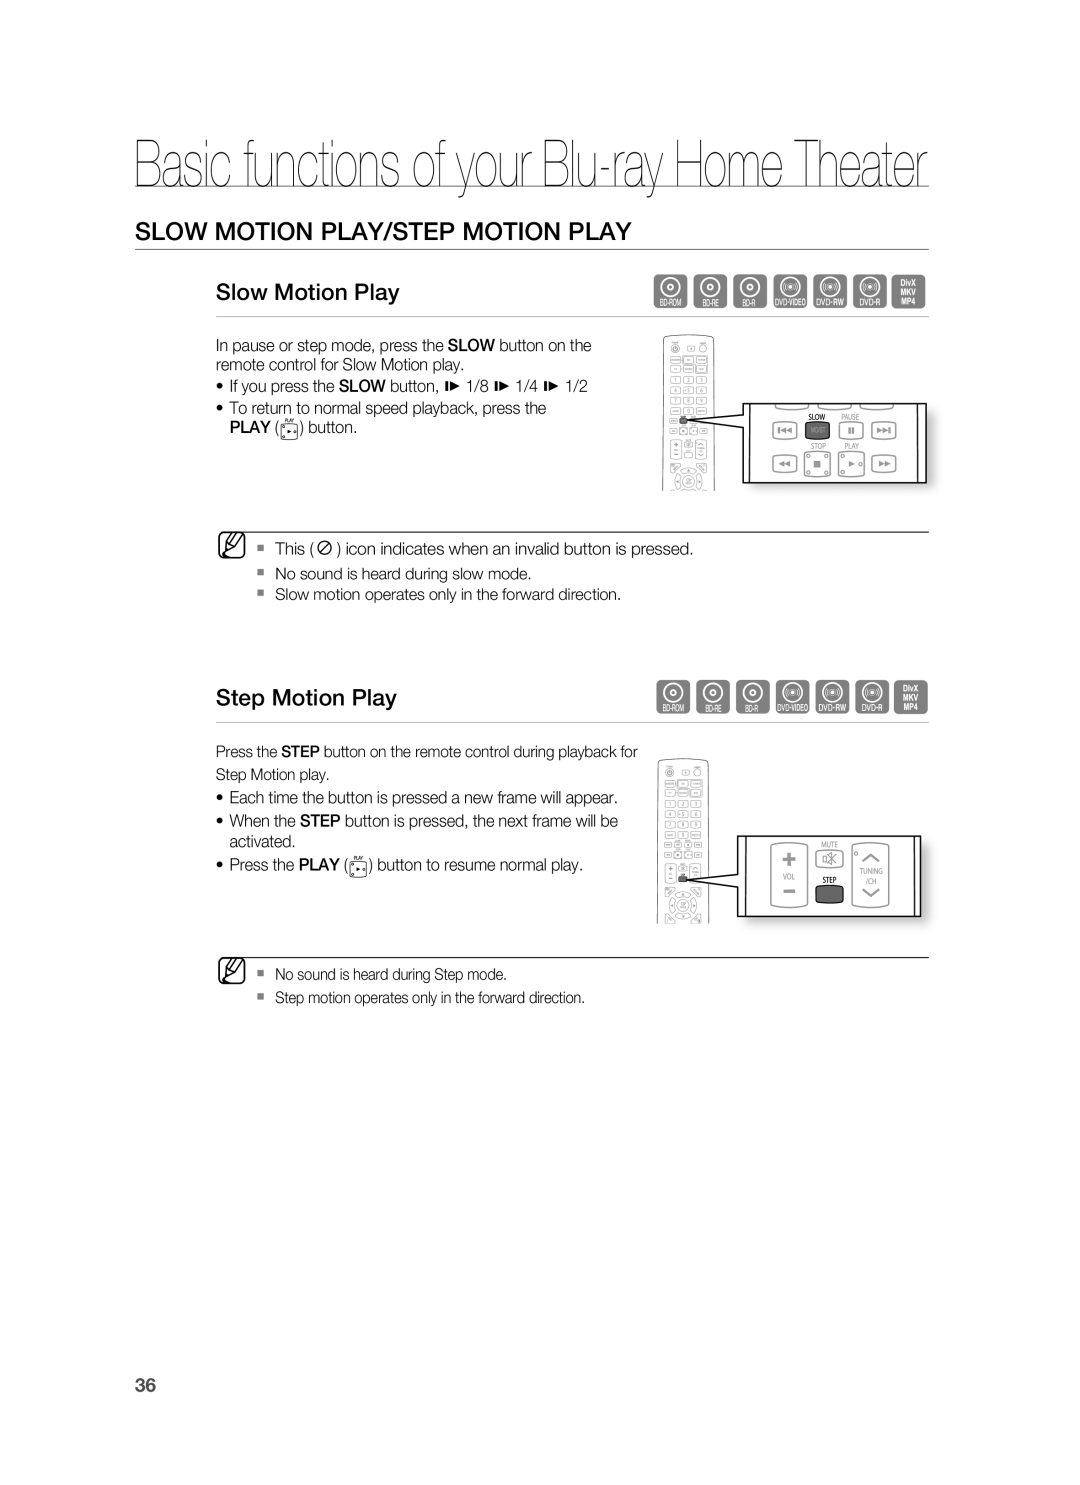 Samsung AH68-02231A, HT-BD3252A Slow Motion Play/Step Motion Play, Basic functions of your Blu-rayHome Theater, hgfZCV 